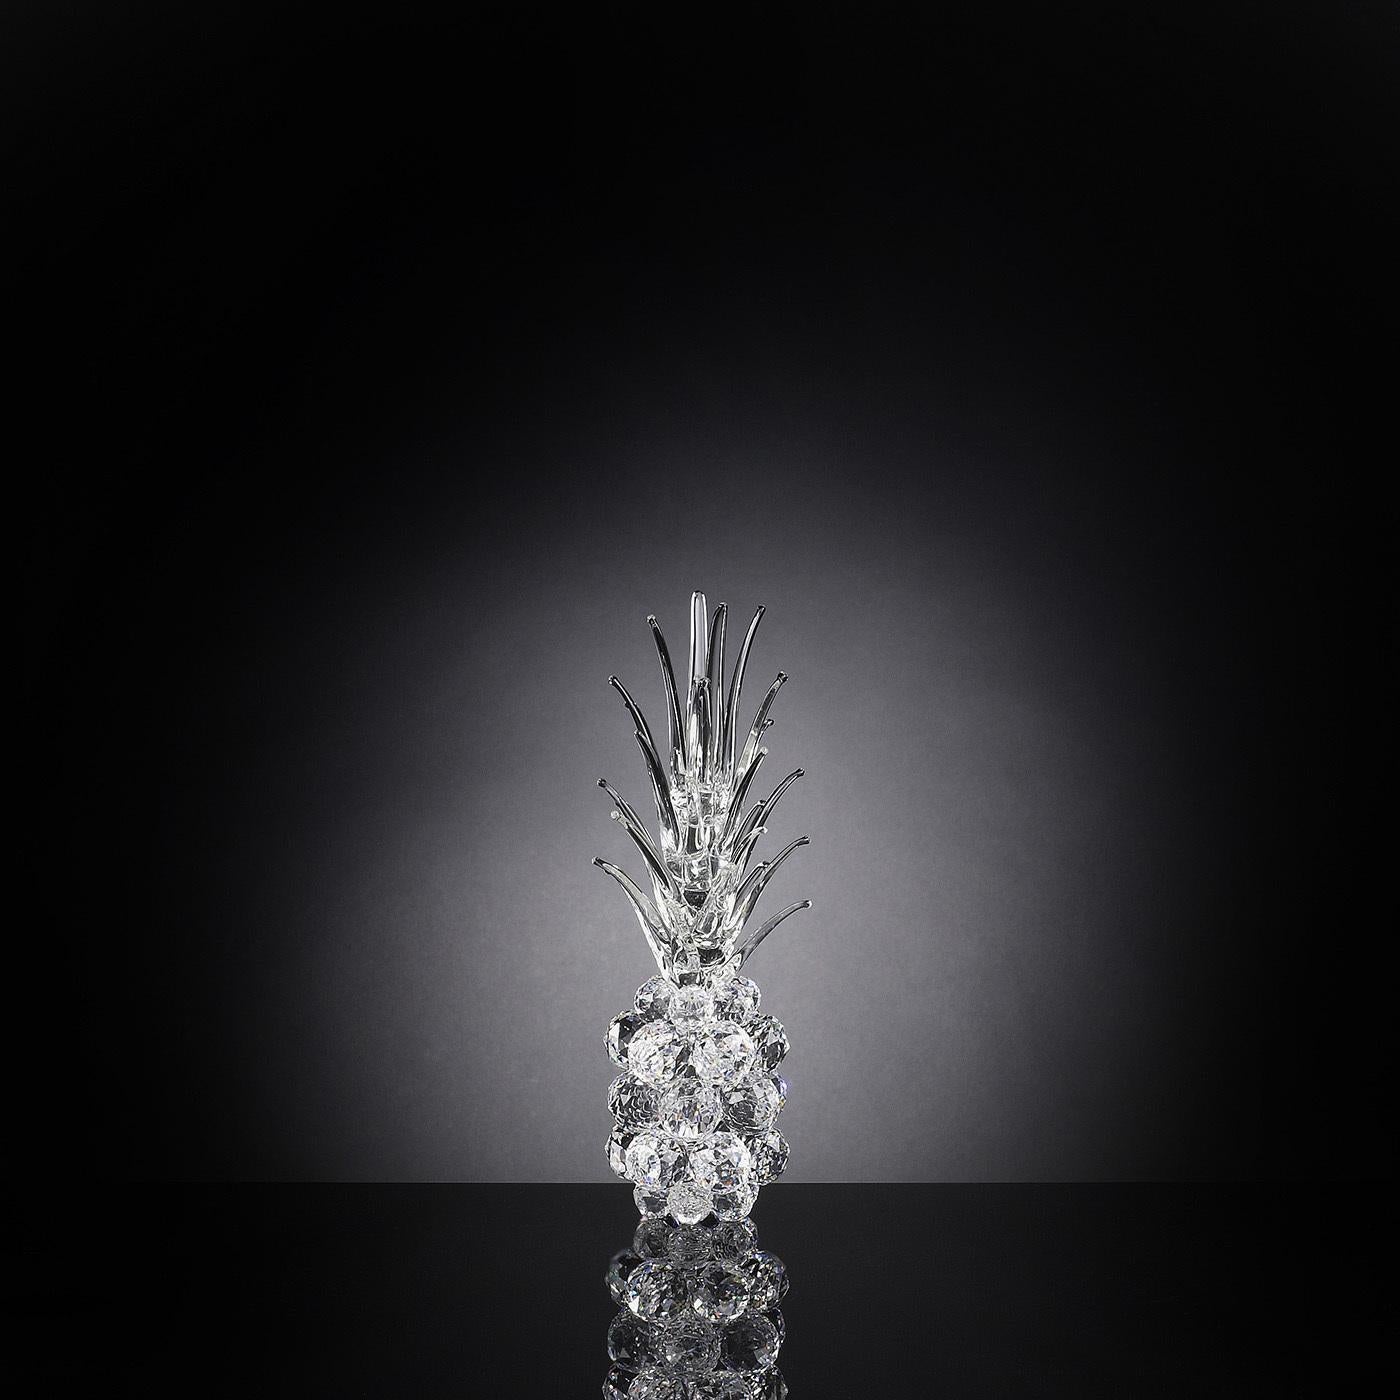 This splendid crystal sculpture is masterfully handmade using traditional crafting techniques. Boasting a sleek yet charming profile, its pineapple-shaped silhouette will add a luminous accent to a modern and elegant decor. A stunning decorative